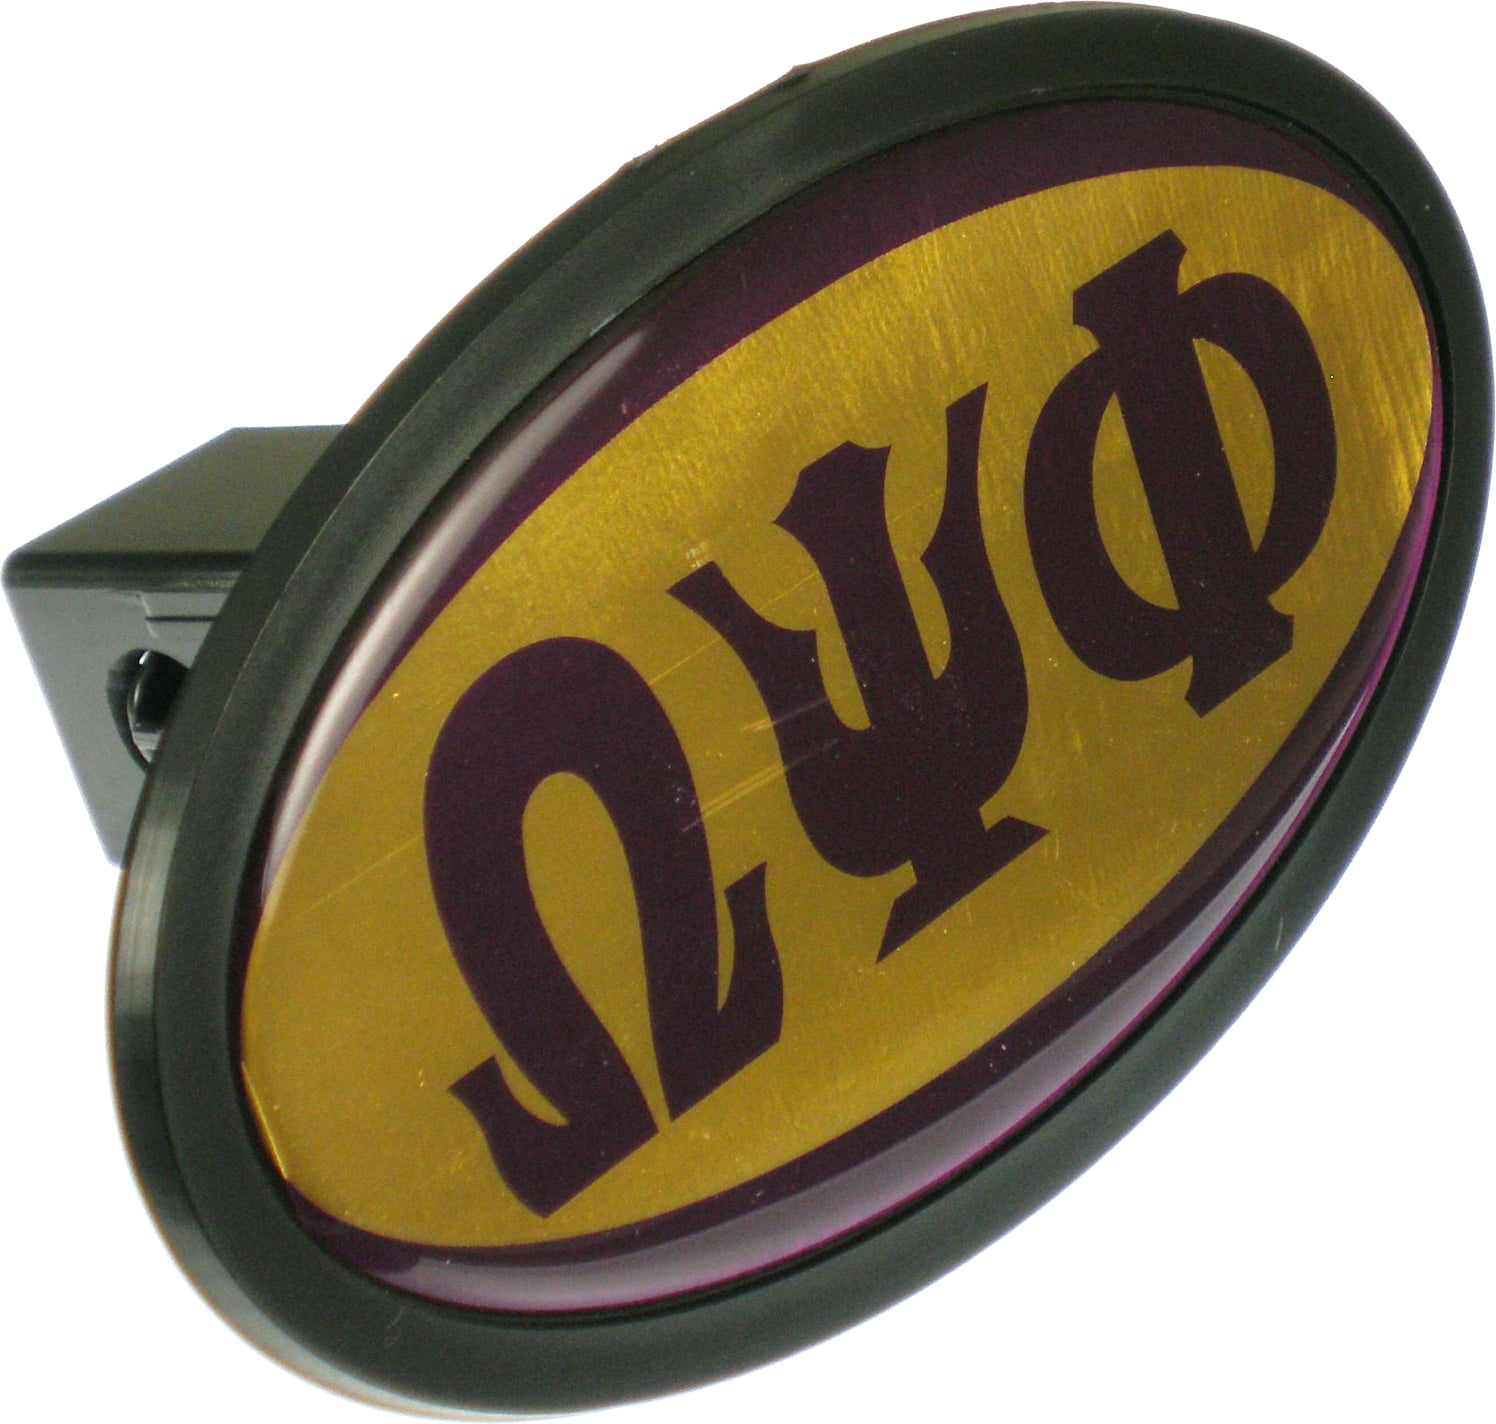 Omega Psi Phi Mirror Domed Trailer Hitch Cover [Black - 1.25"R Omega Psi Phi Trailer Hitch Cover